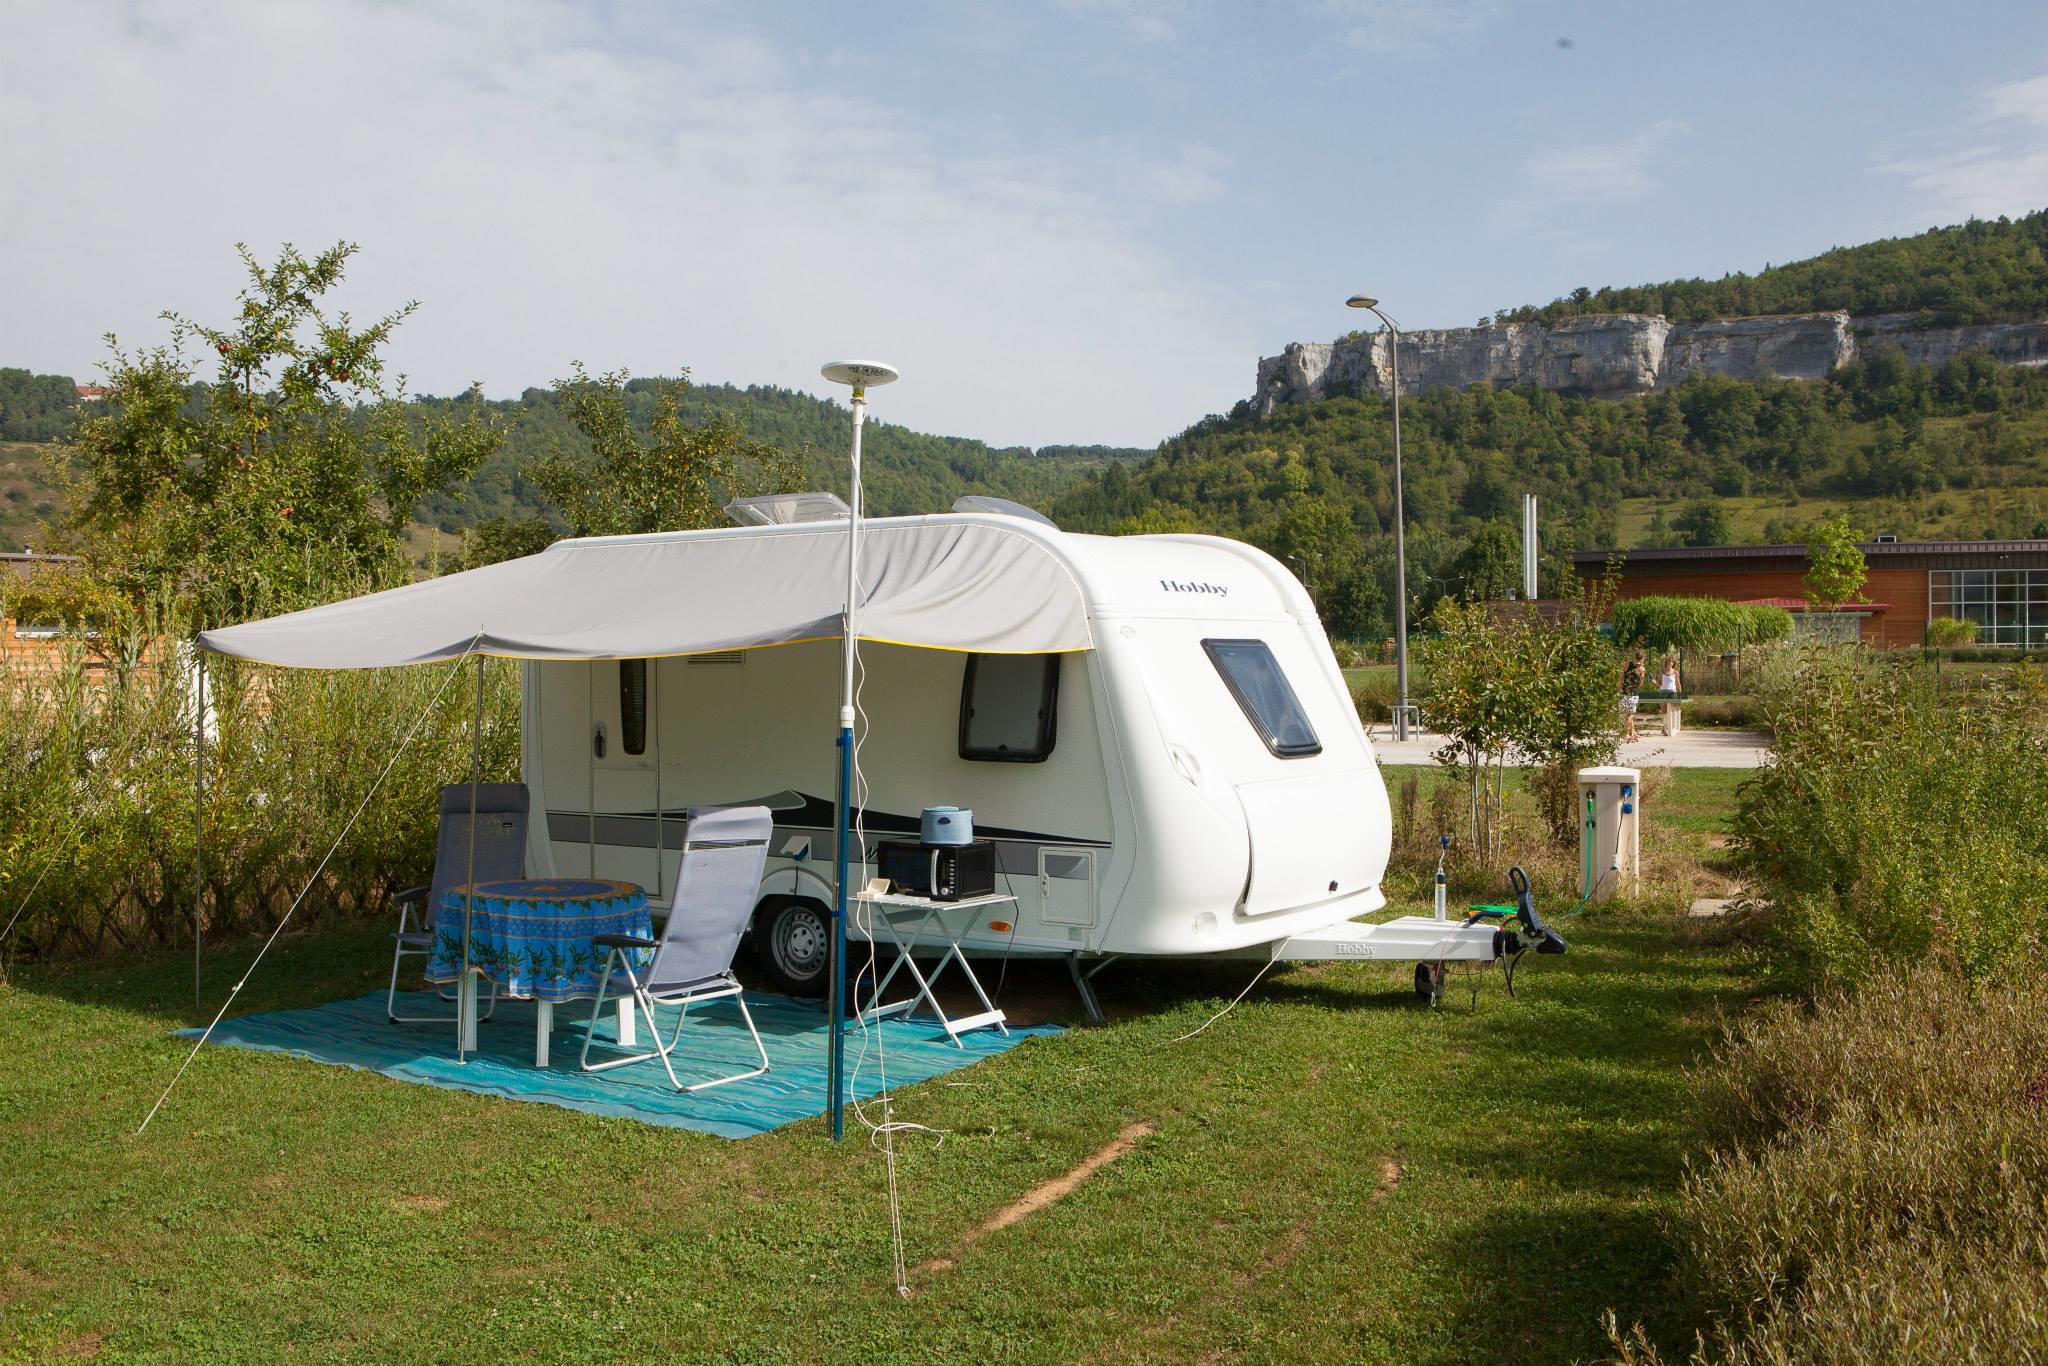 Pitch - Comfort Package : 2 People + Car + Electricity / 120 M² - Camping Ecologique LA ROCHE D'ULLY